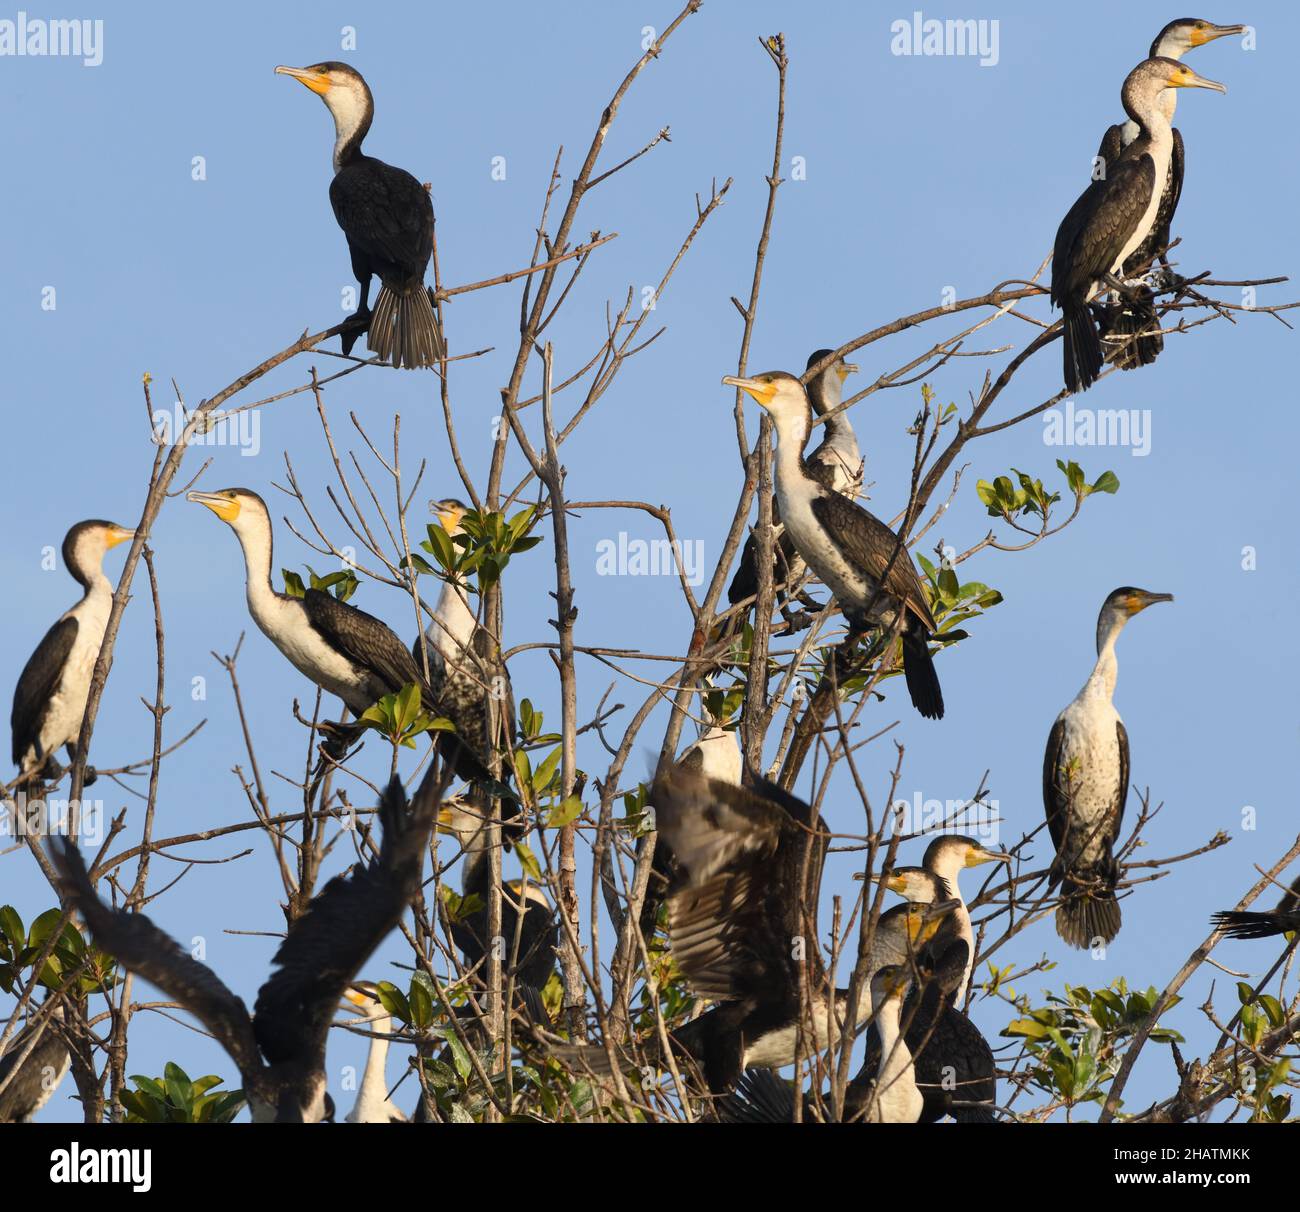 White-breasted cormorants (Phalacrocorax lucidus) at their nesting site above a creek off the Gambia River. Tendaba, The Republic of the Gambia. Stock Photo